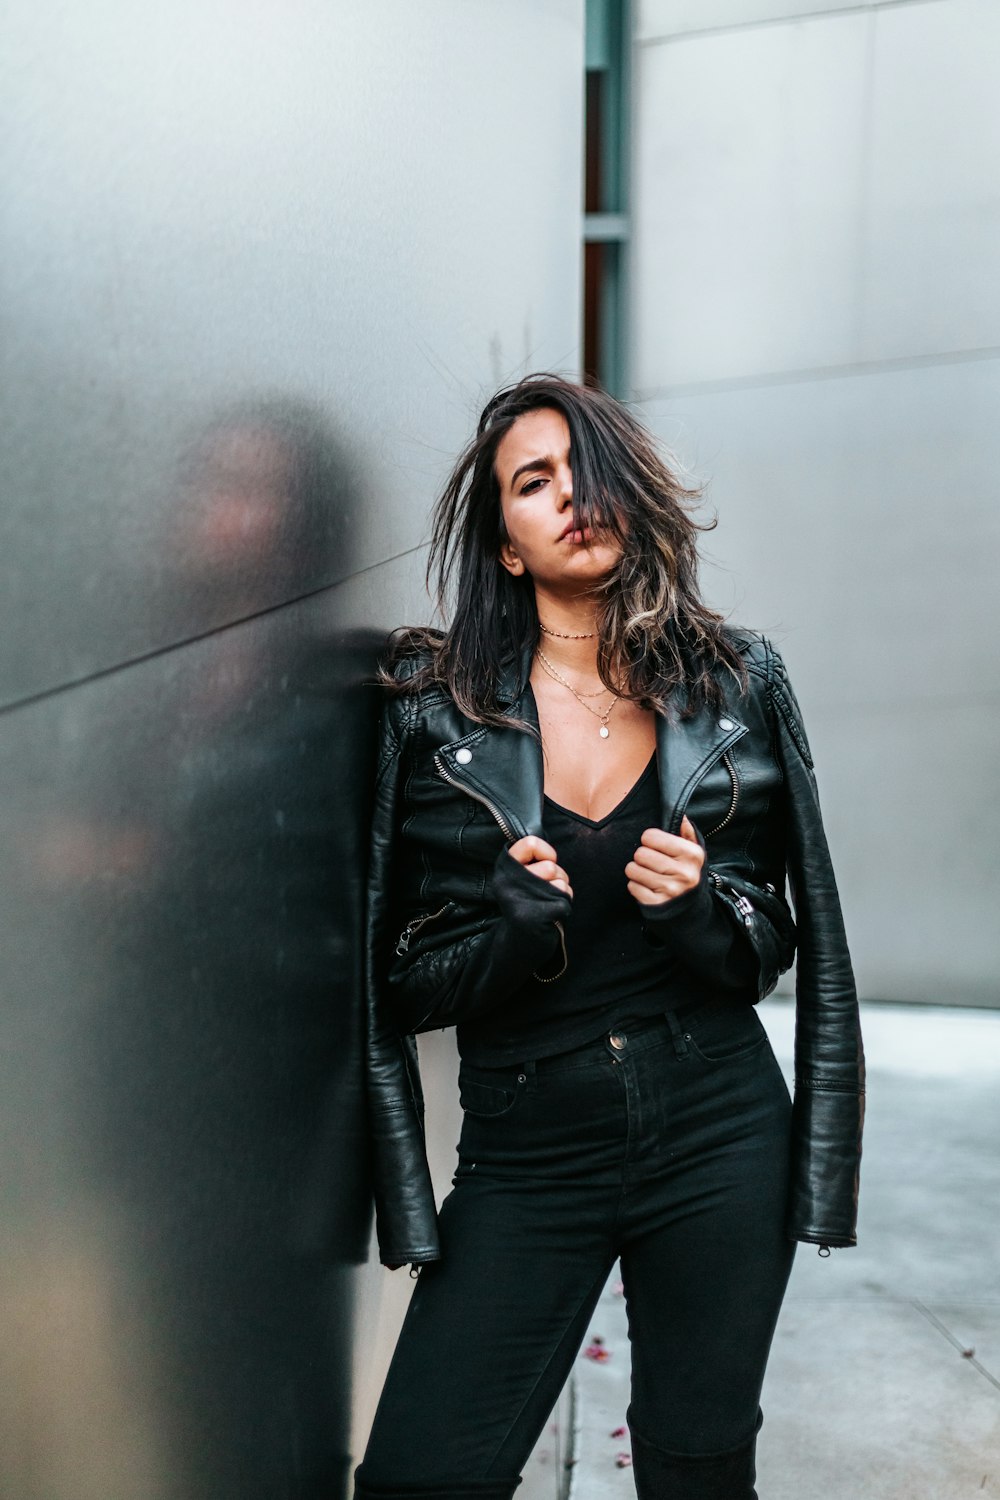 Girls in leather Girl In Leather Jacket Pictures Download Free Images On Unsplash